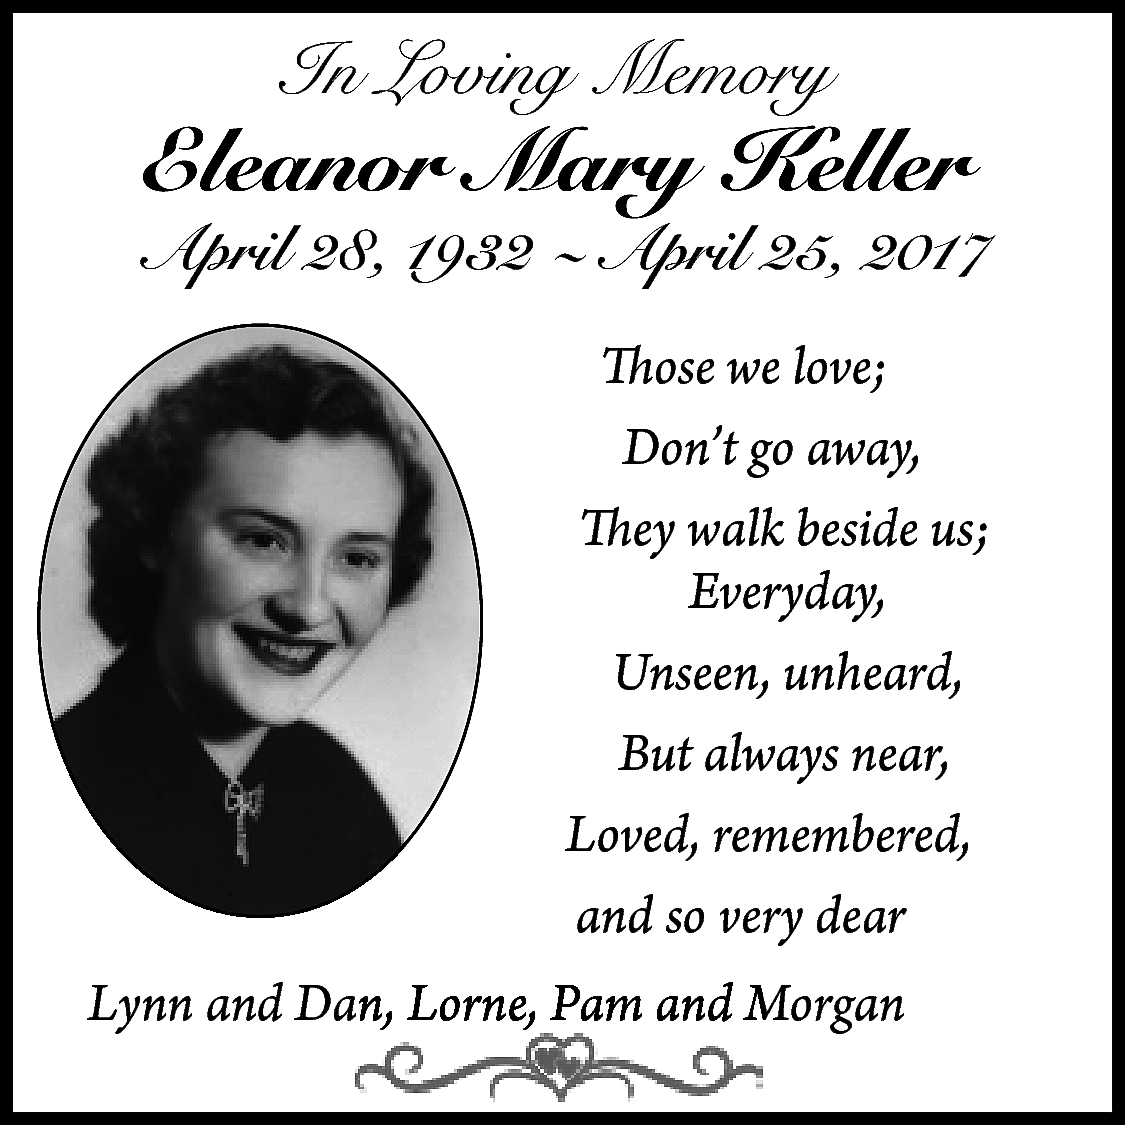 In Loving Memory <br> <br>Eleanor  In Loving Memory    Eleanor Mary Keller    April 28, 1932 ~ April 25, 2017  Those we love;  Don’t go away,  They walk beside us;  Everyday,  Unseen, unheard,  But always near,  Loved, remembered,  and so very dear    Lynn and Daan, Lorne, Pam andd M  Morgan    